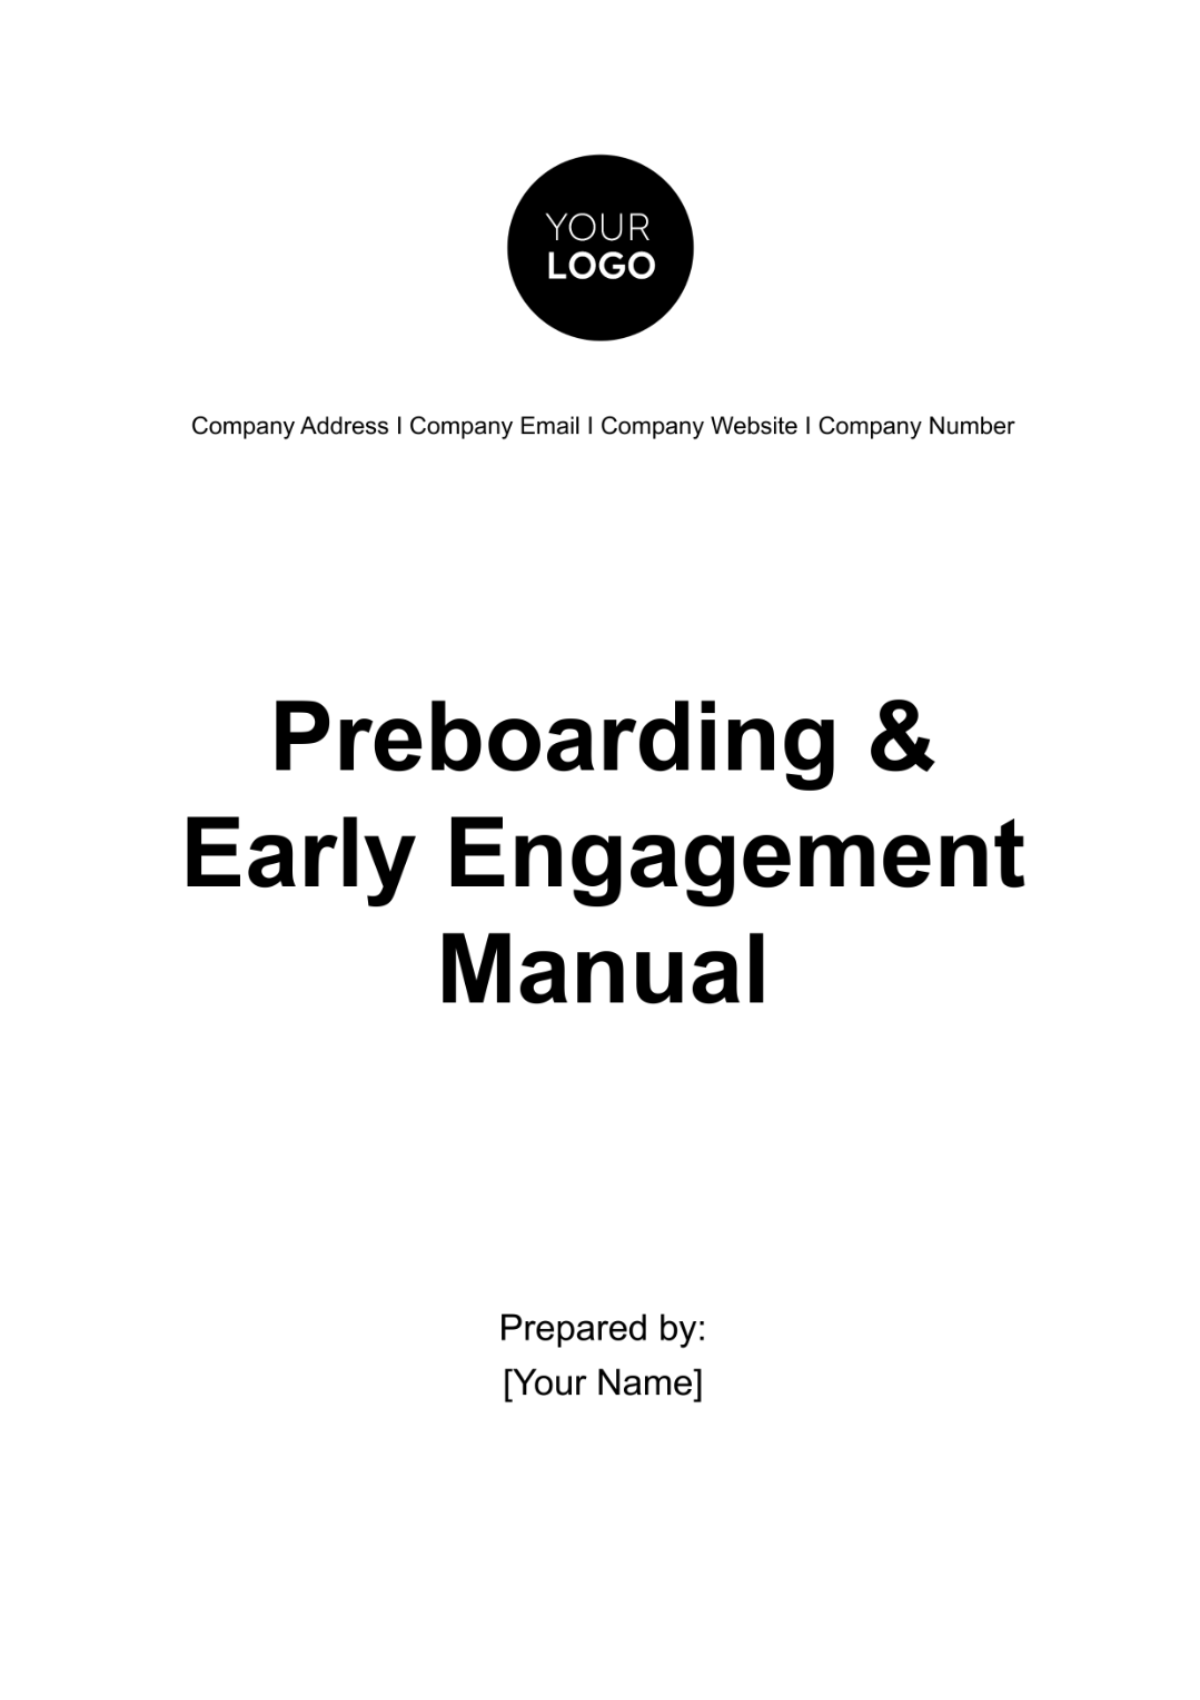 Preboarding & Early Engagement Manual HR Template